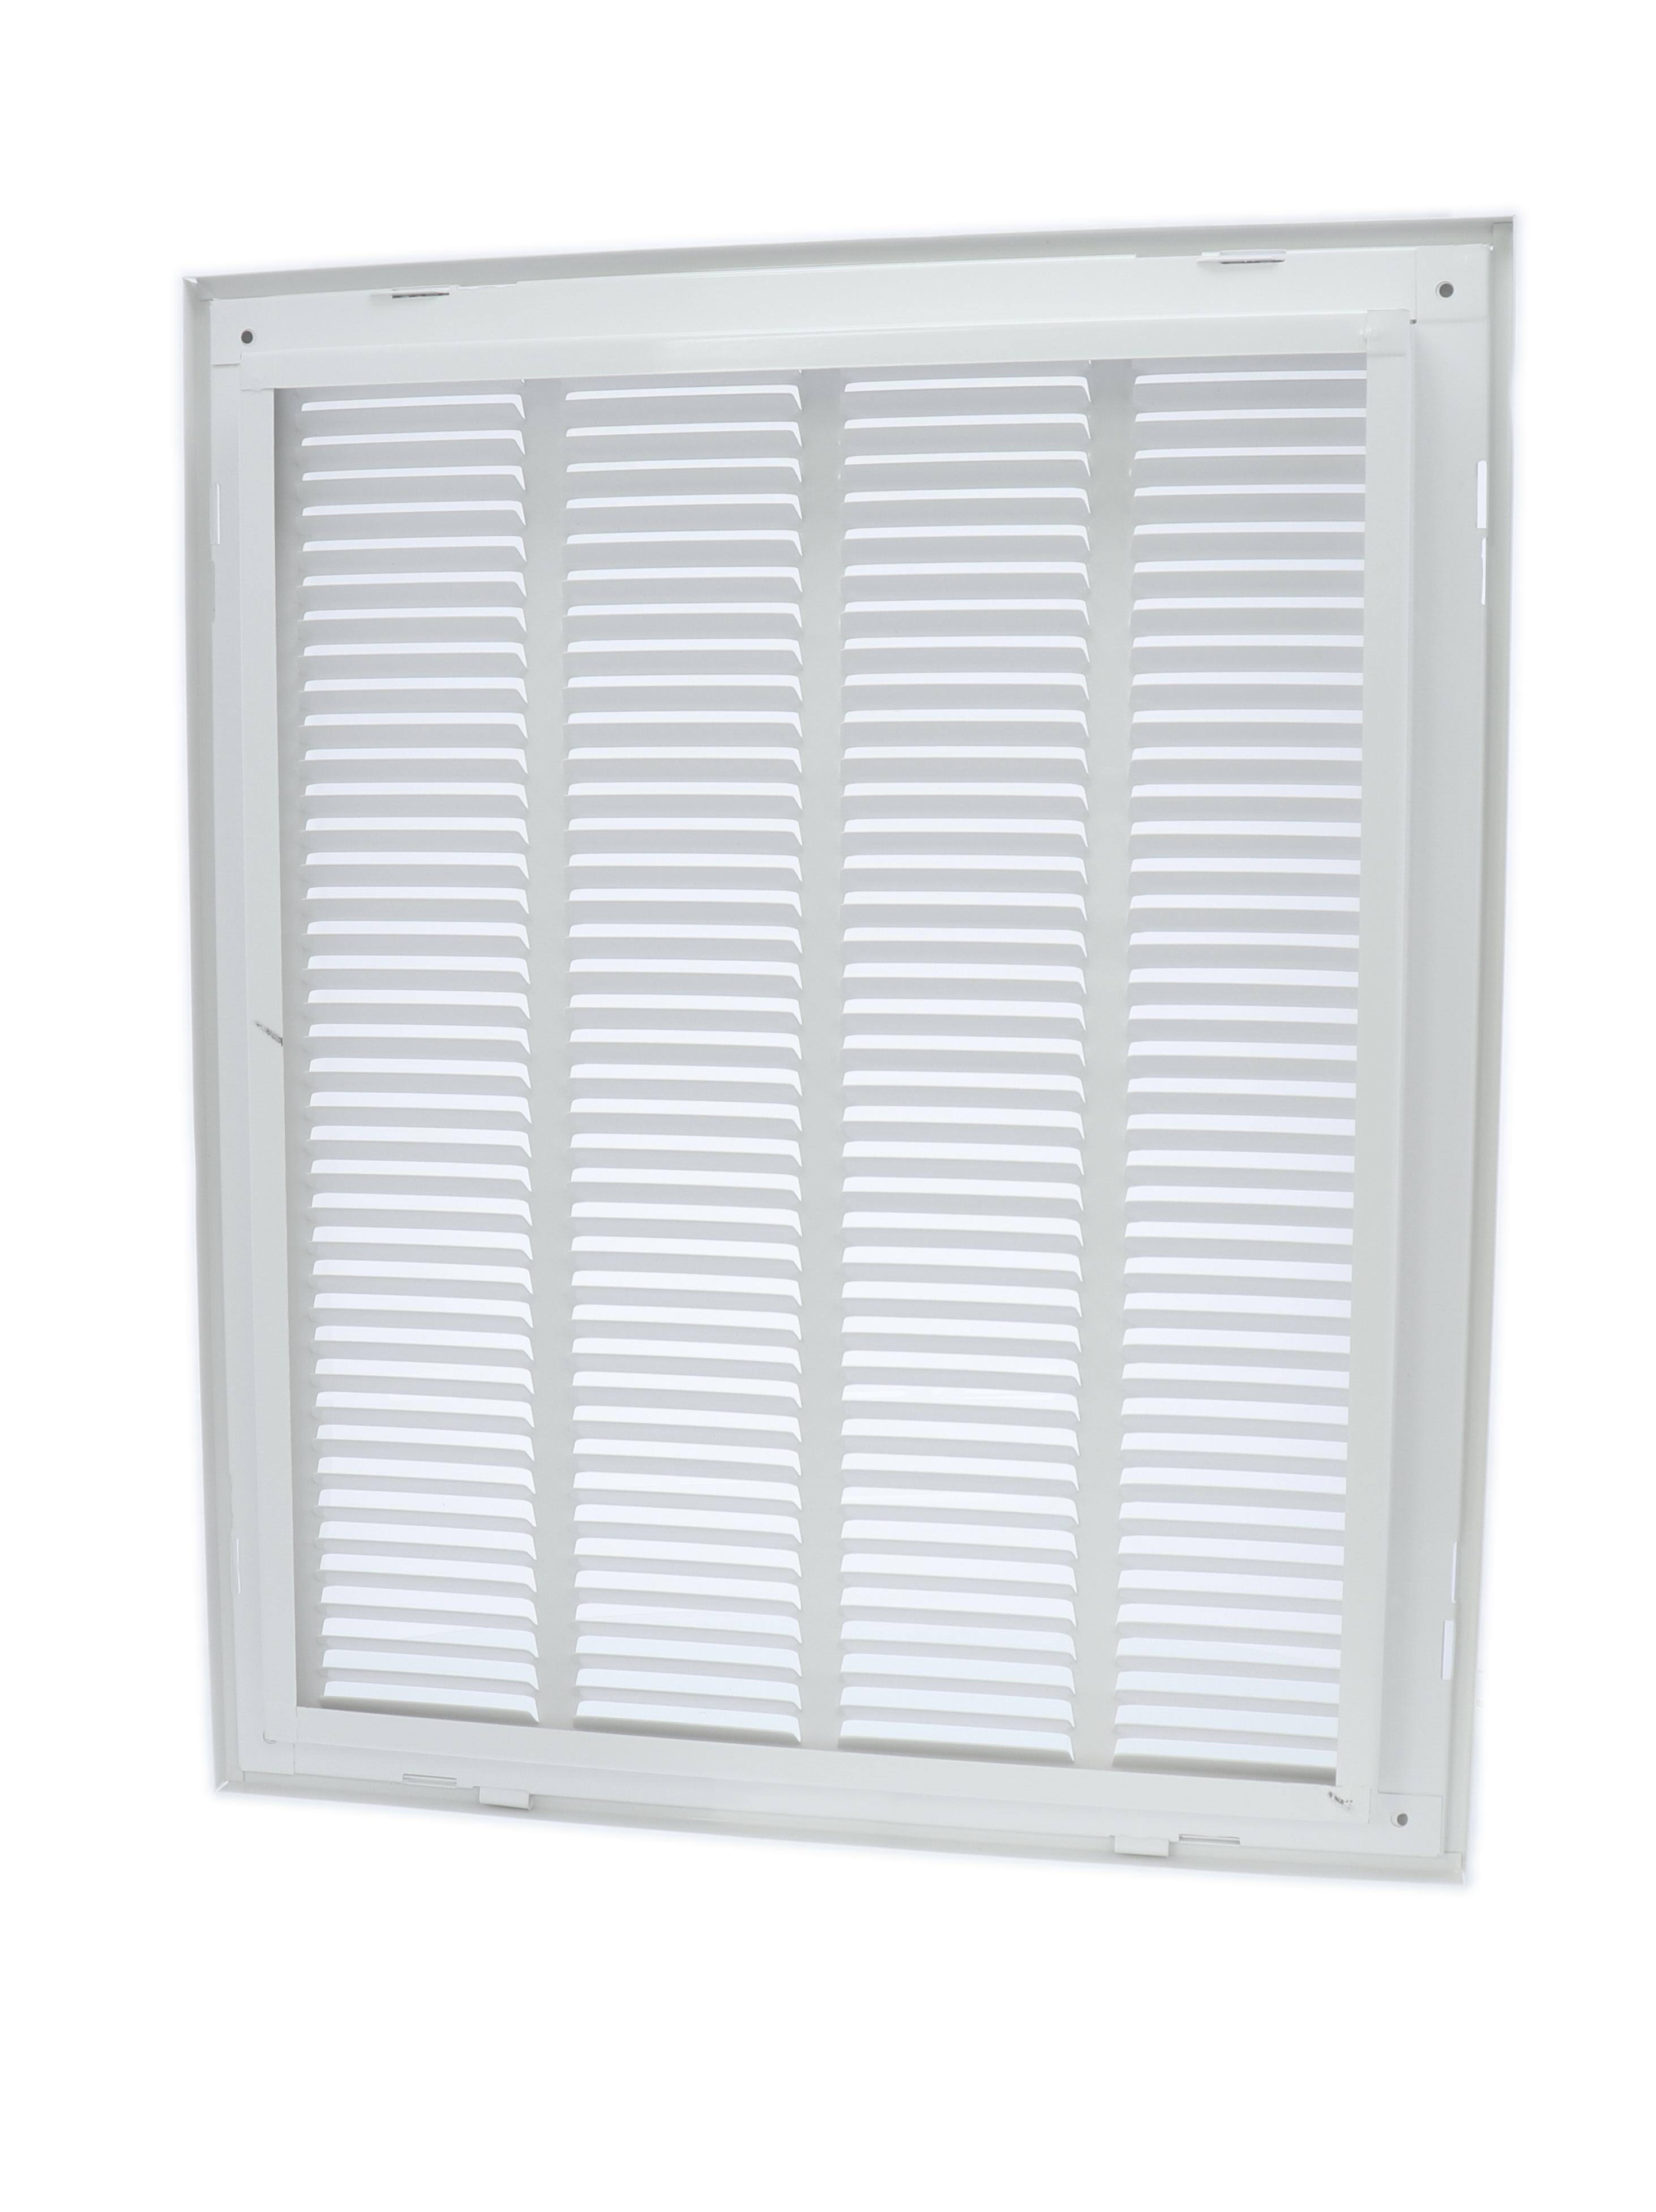 LIMA 60GHFF-30 X 10 WHT/001248 10" X 30" STAMP-FACED RETURN AIR FILTER GRILLE 1 